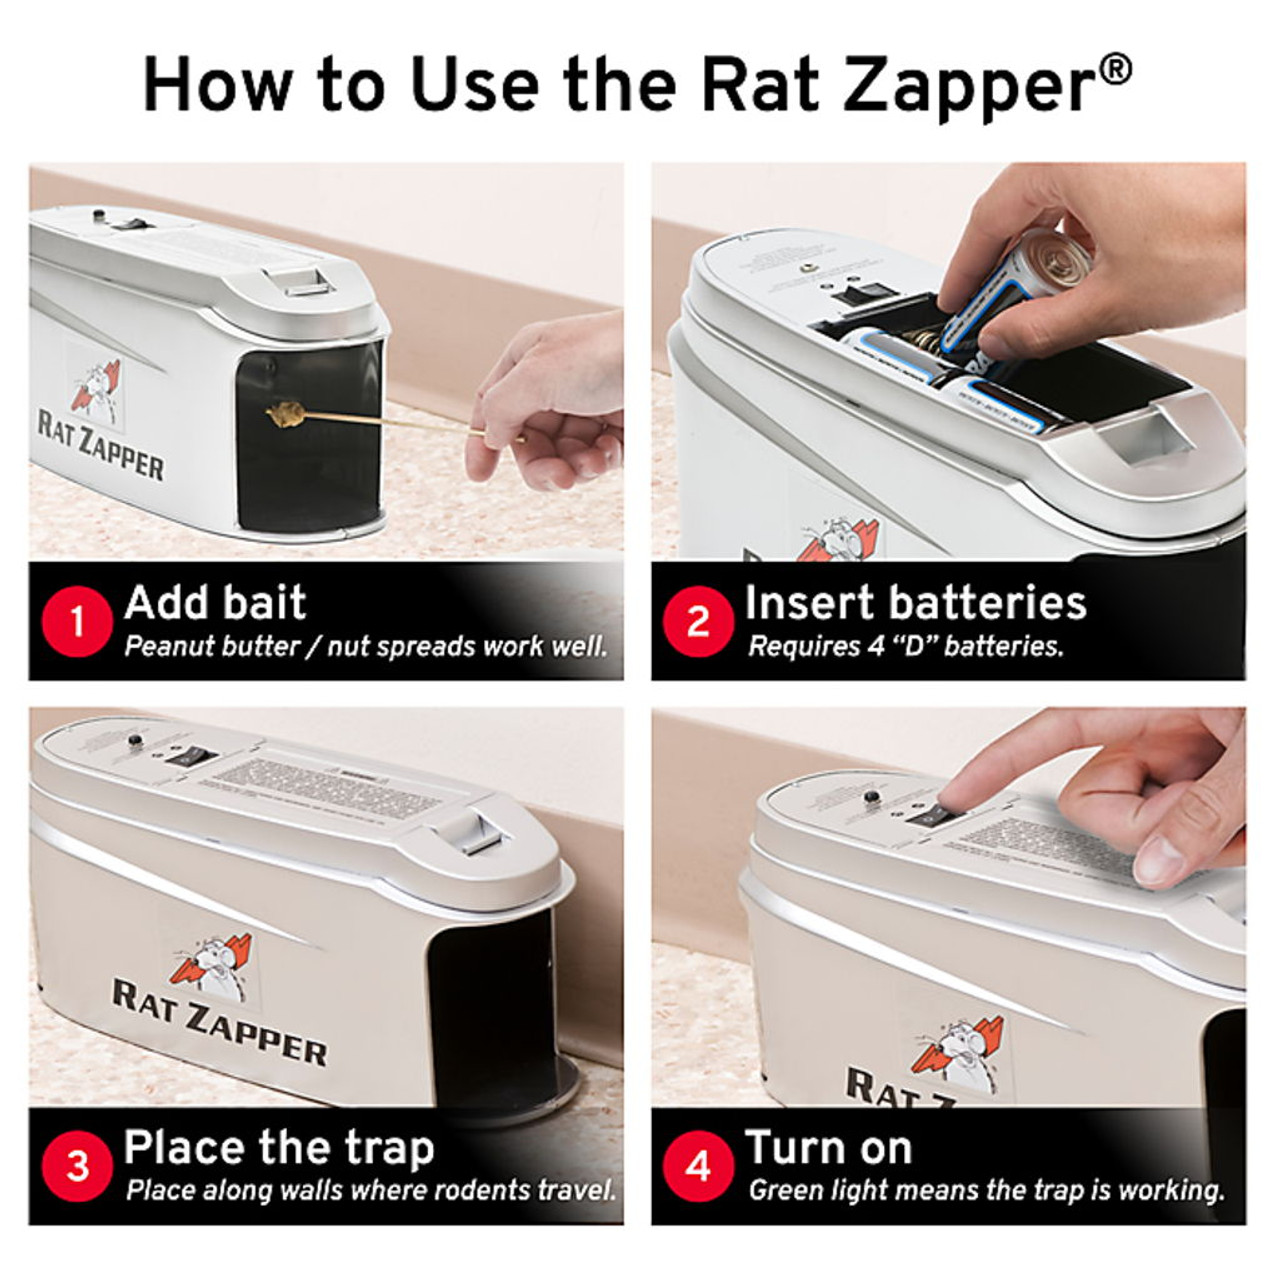 One Of The Easiest Ways To Catch A Rat - The Victor Electronic Rat